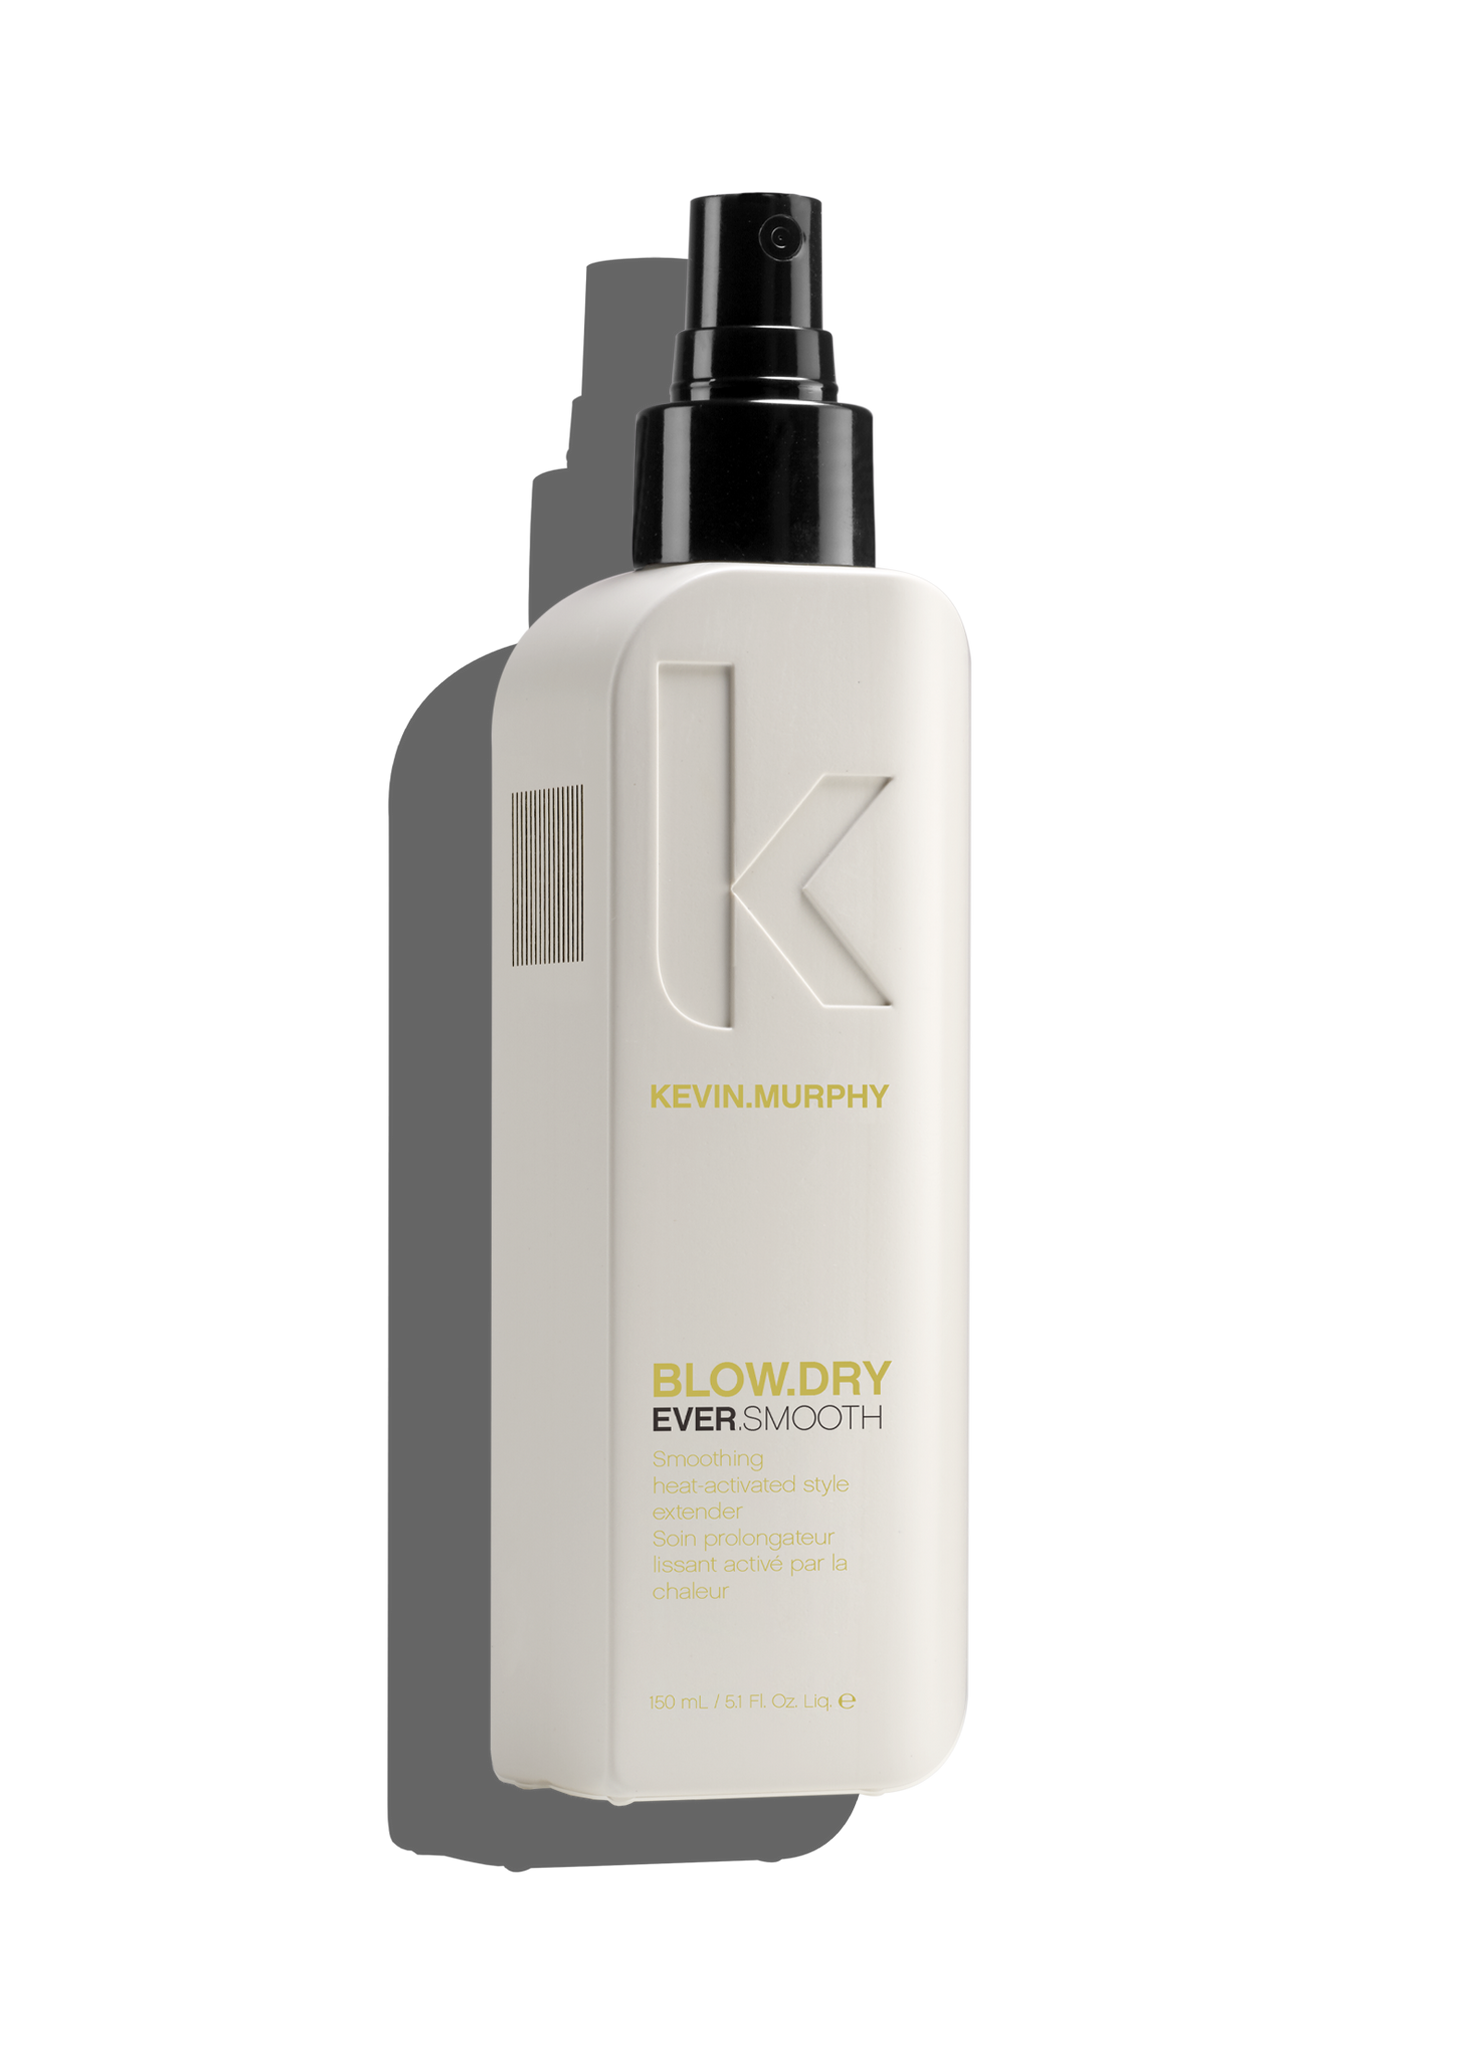 KEVIN MURPHY EVER SMOOTH